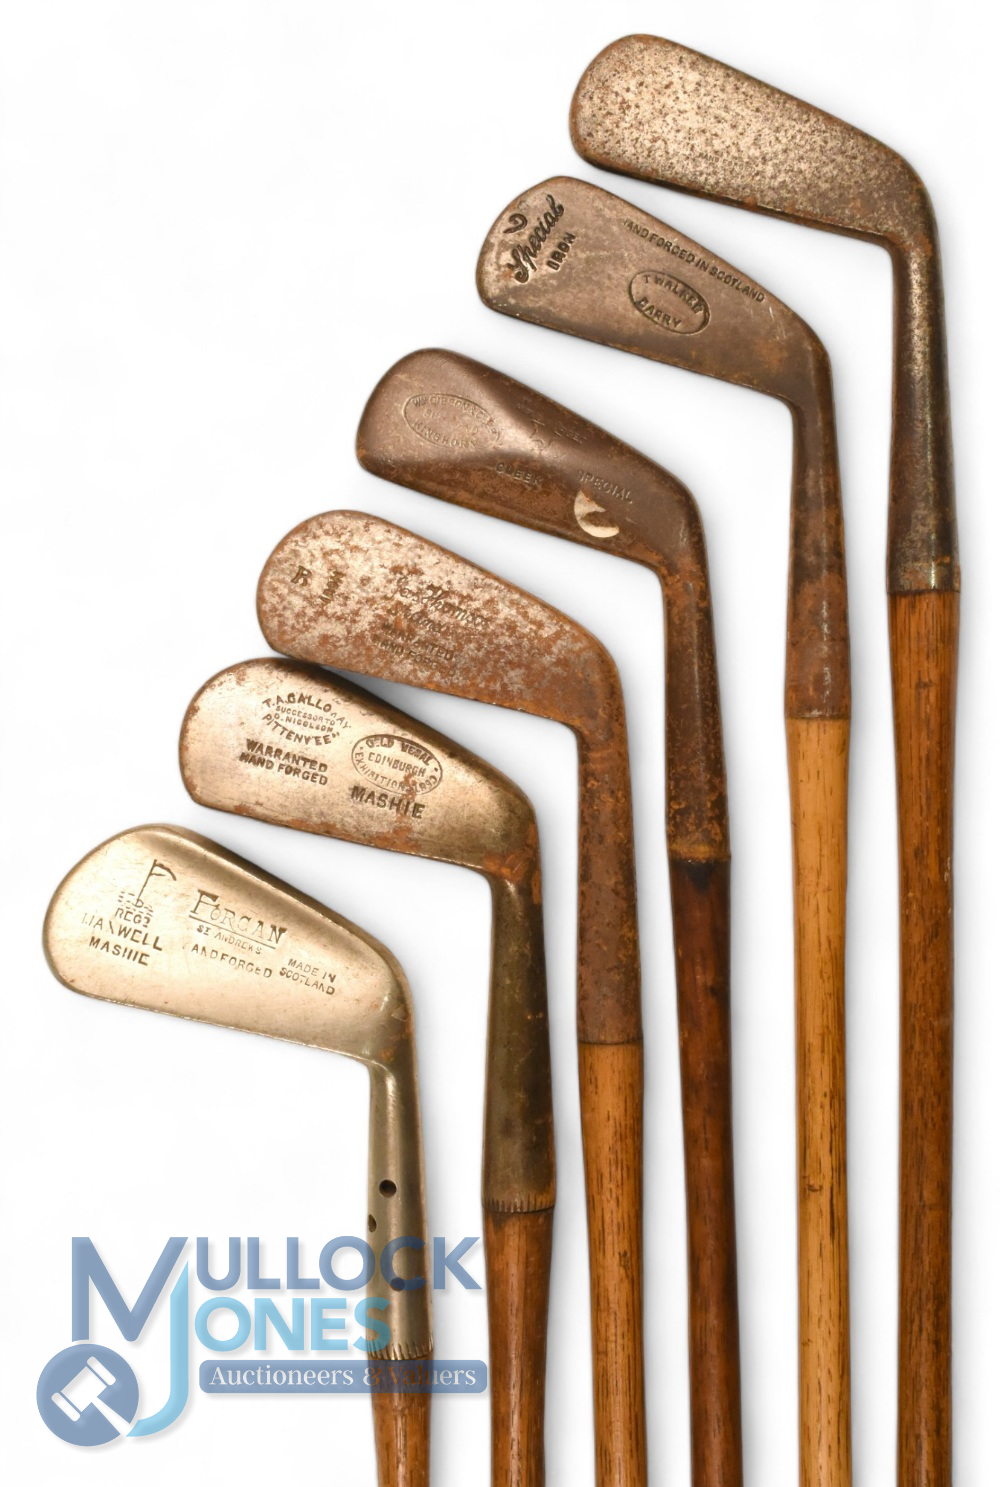 6x Assorted Irons incl Forgan Maxwell mashie, Gold Medal mashie by TA Galloway, T Walker No 2